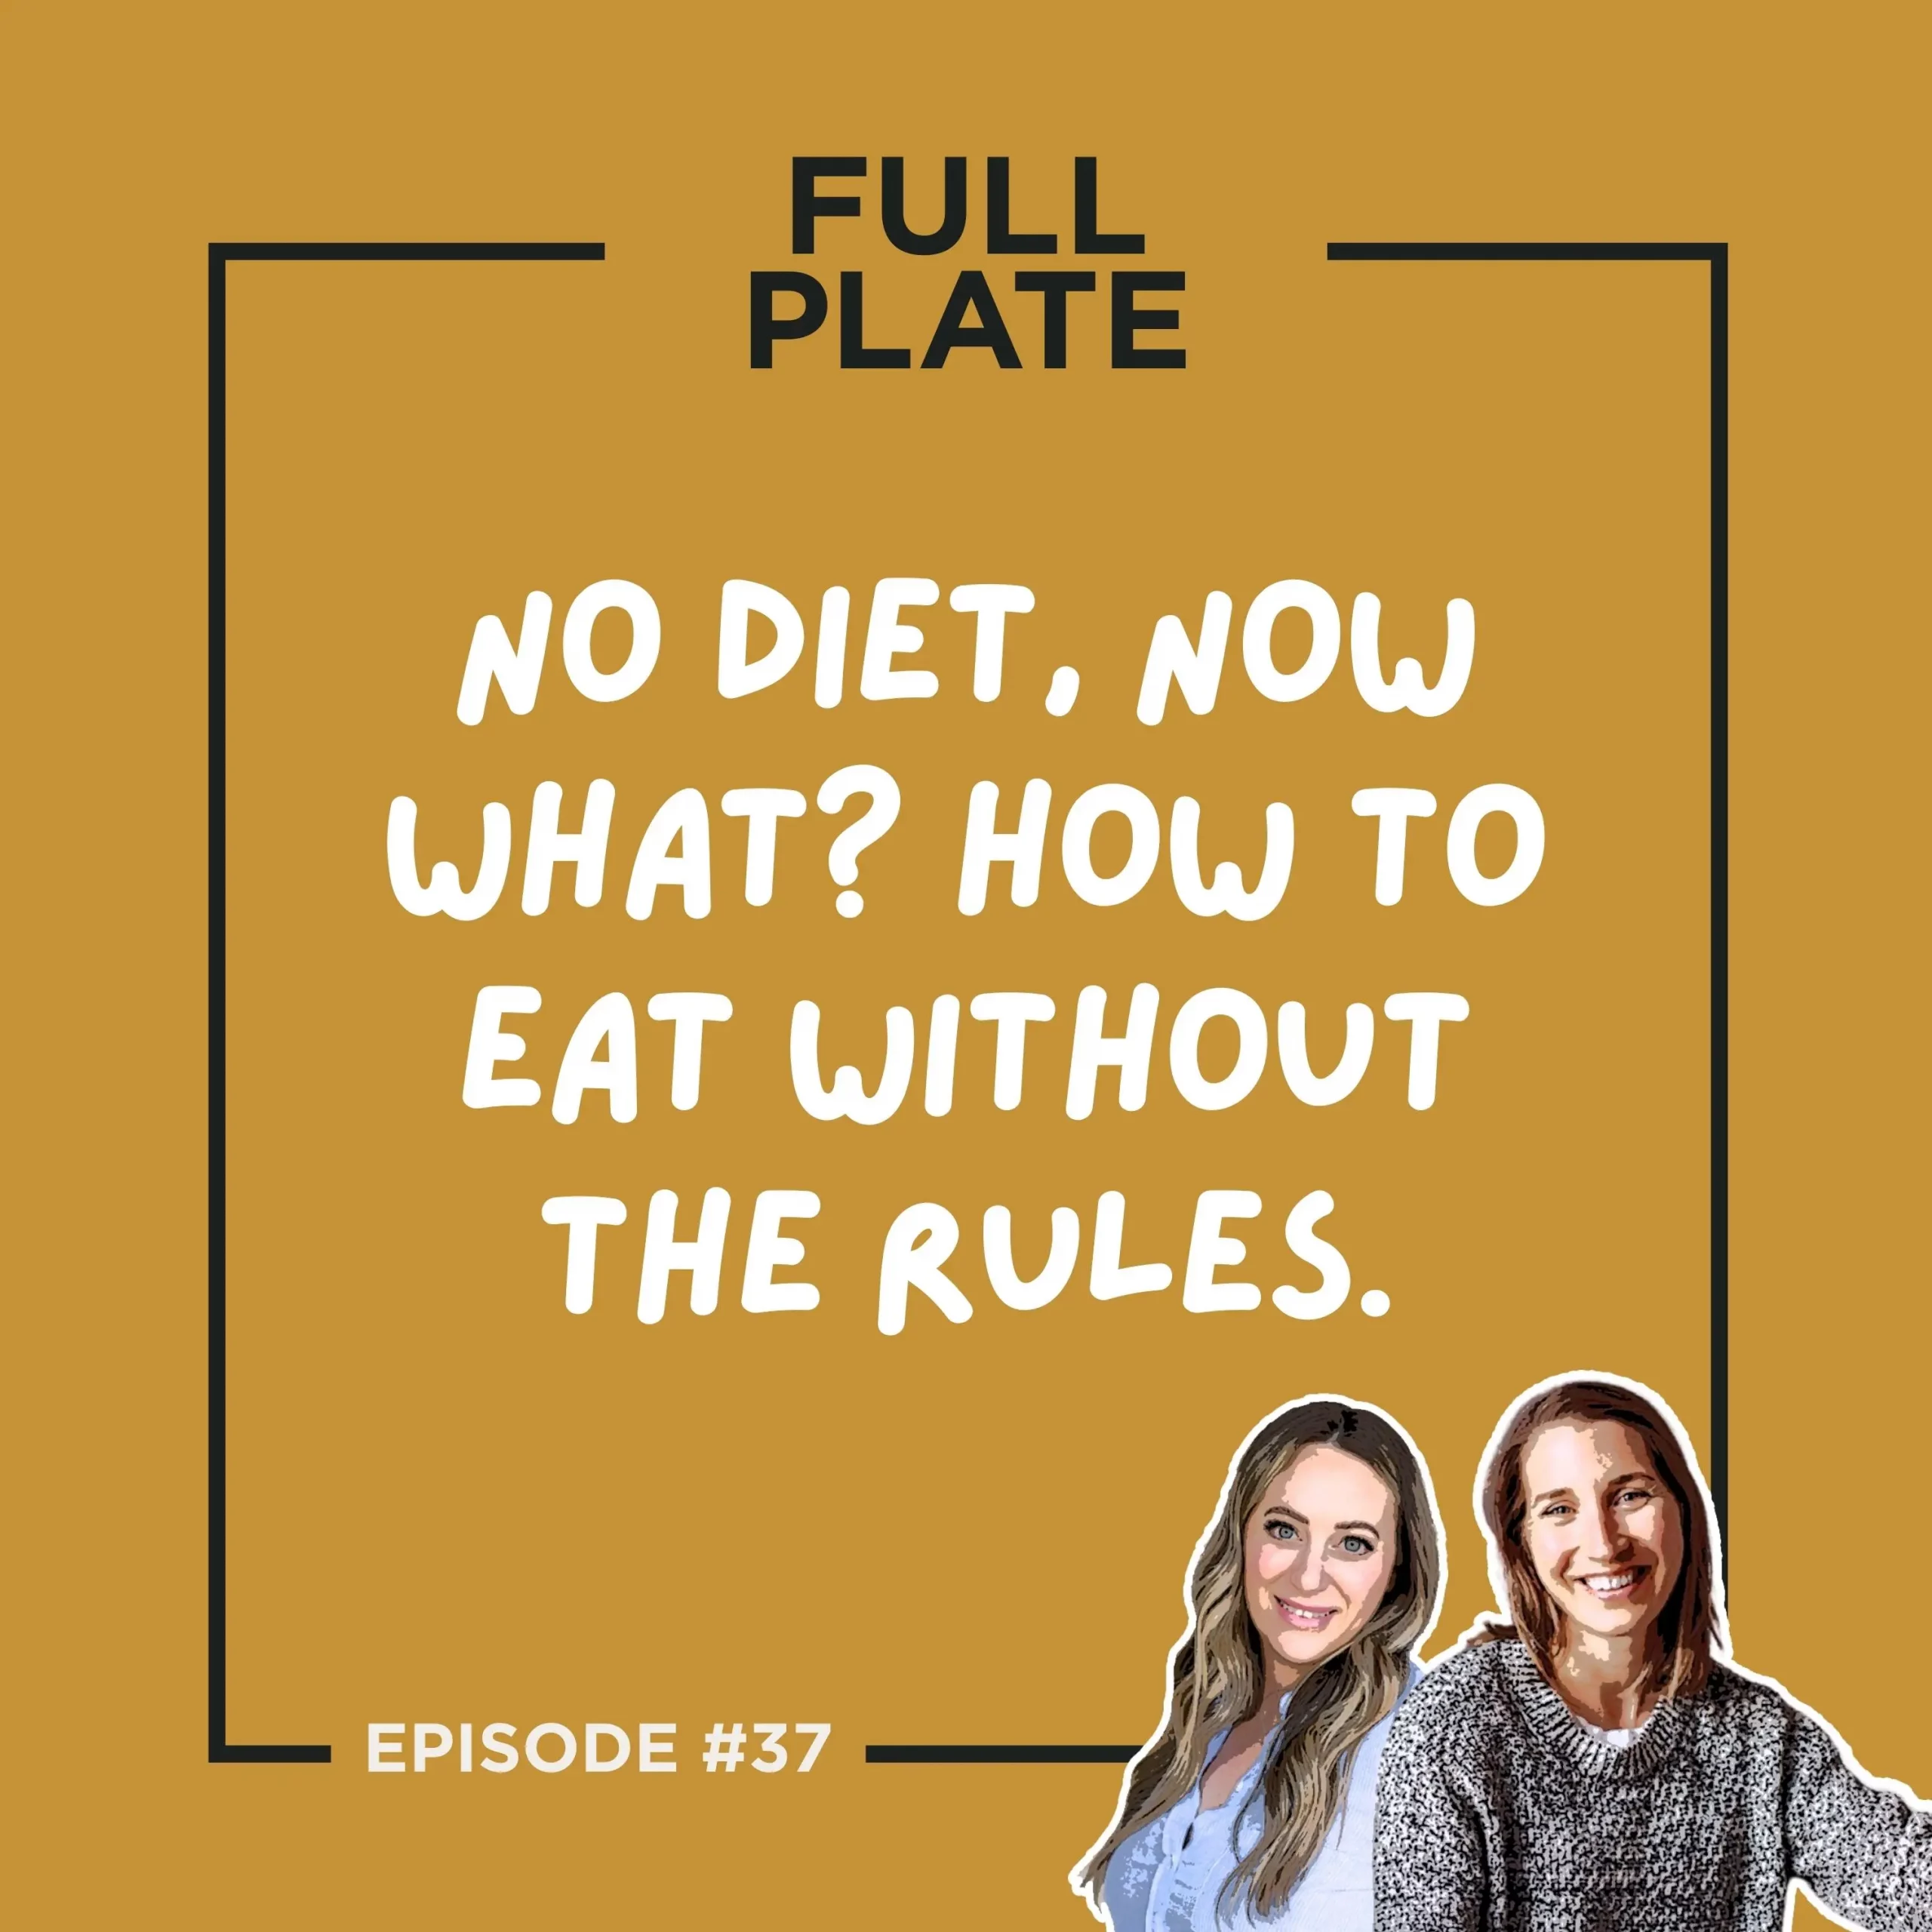 Full Plate Podcast | Ditch diet culture, respect your body, and set boundaries | Episode 37: No Diet, Now What? How to Eat without the Rules